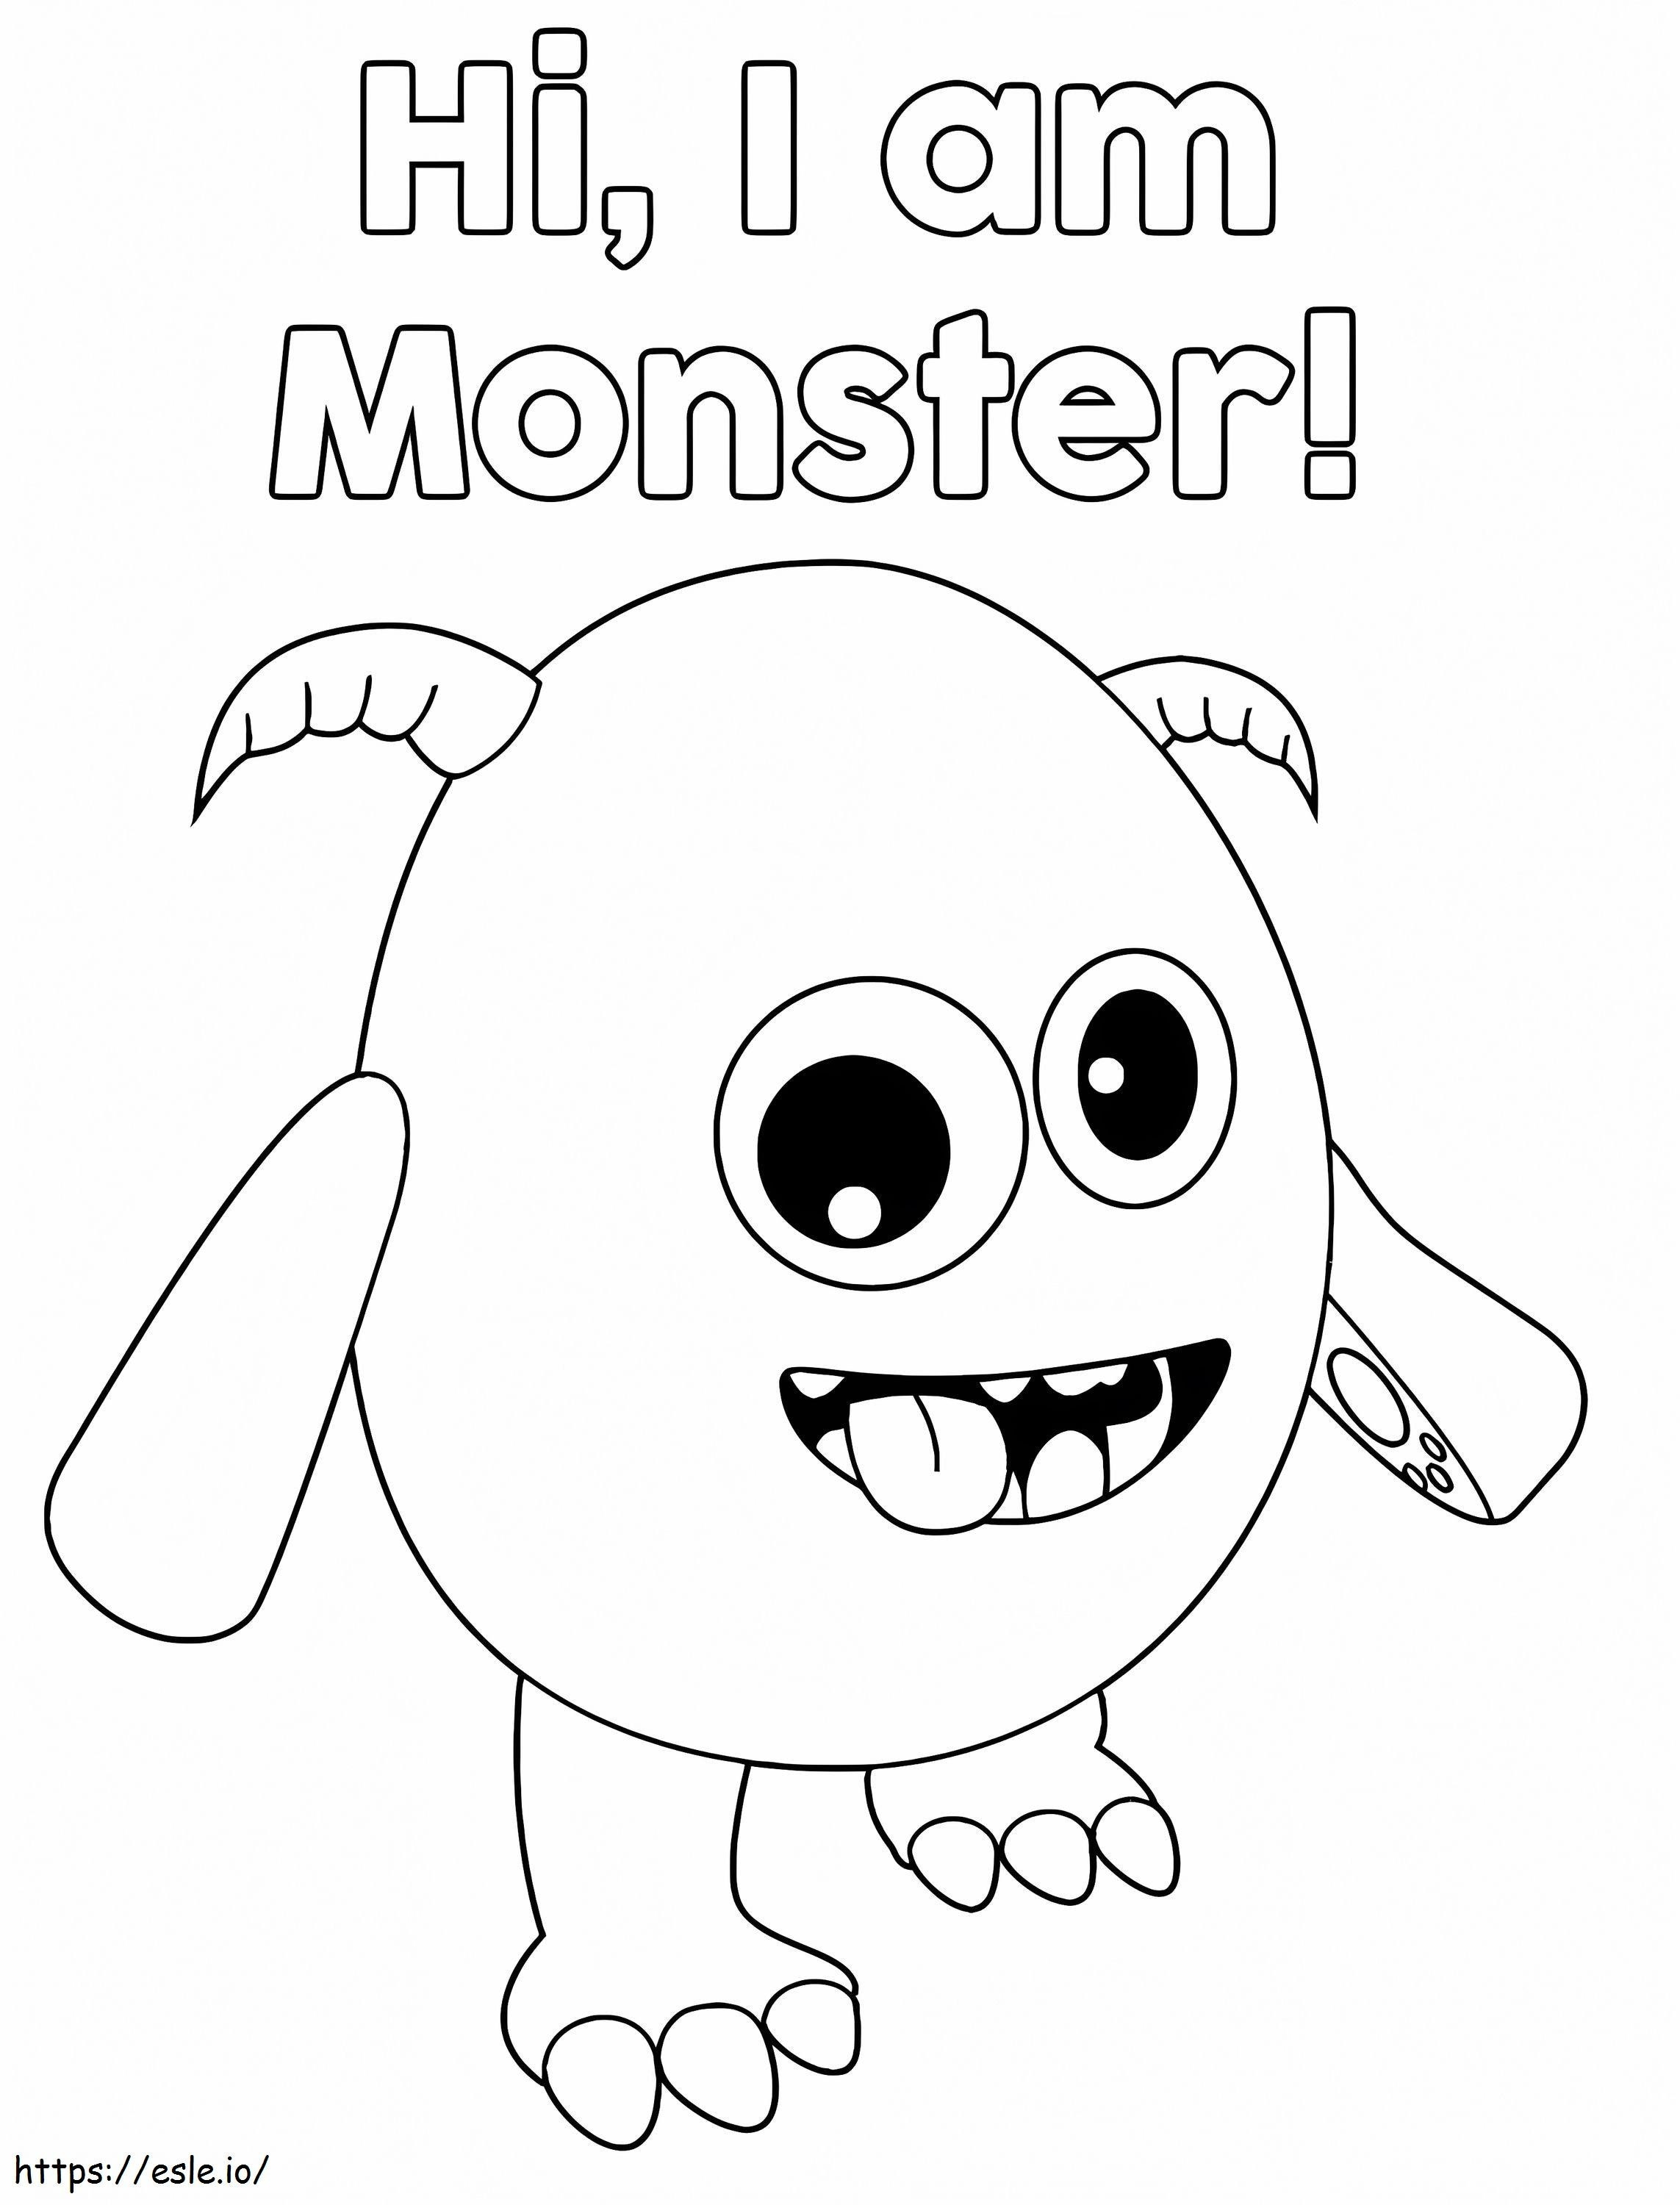 Monster Little Baby Bum coloring page